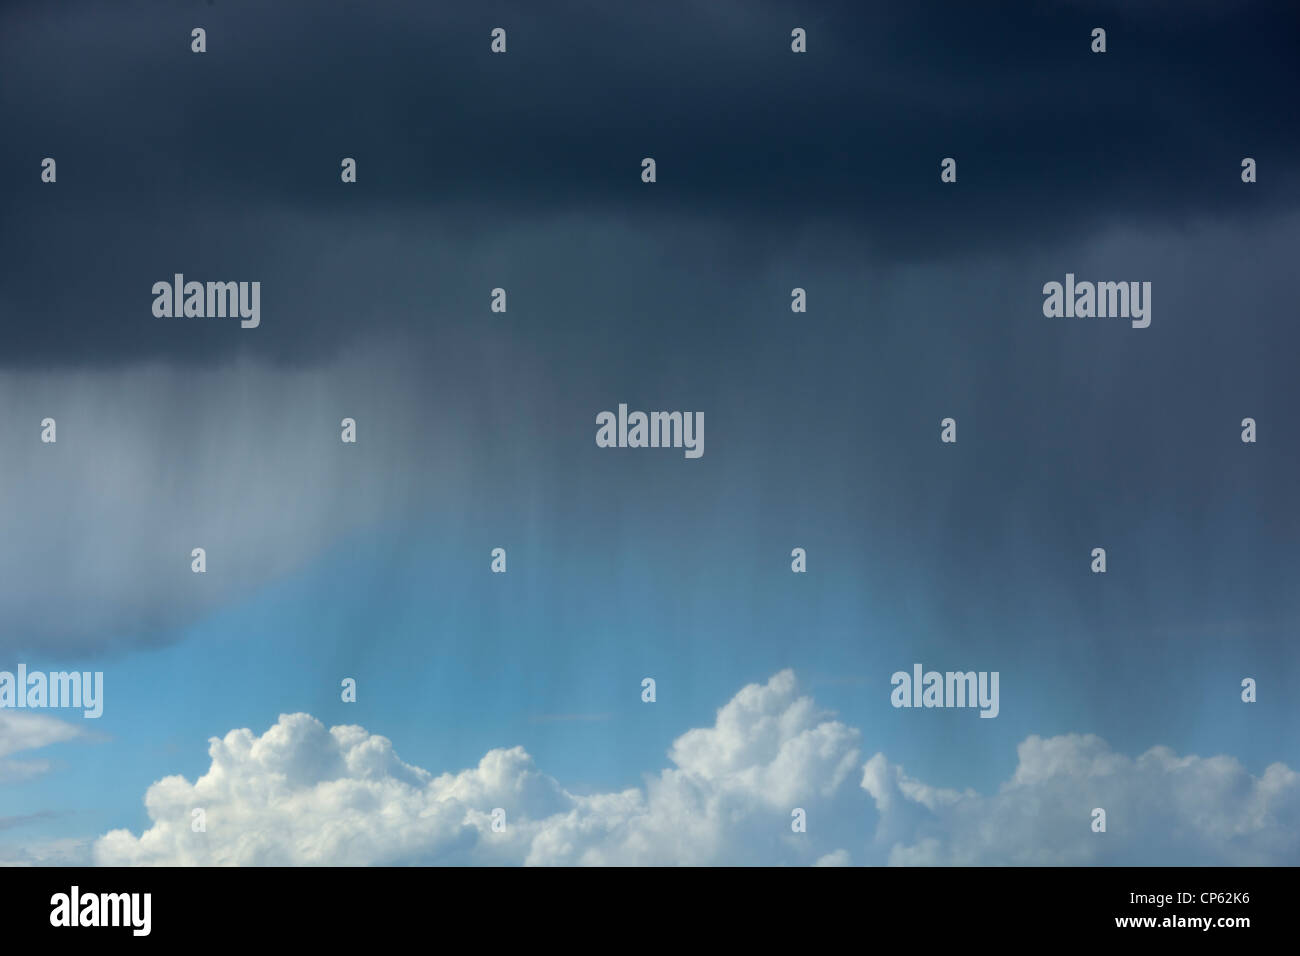 rain falling from dark clouds on showery day Stock Photo